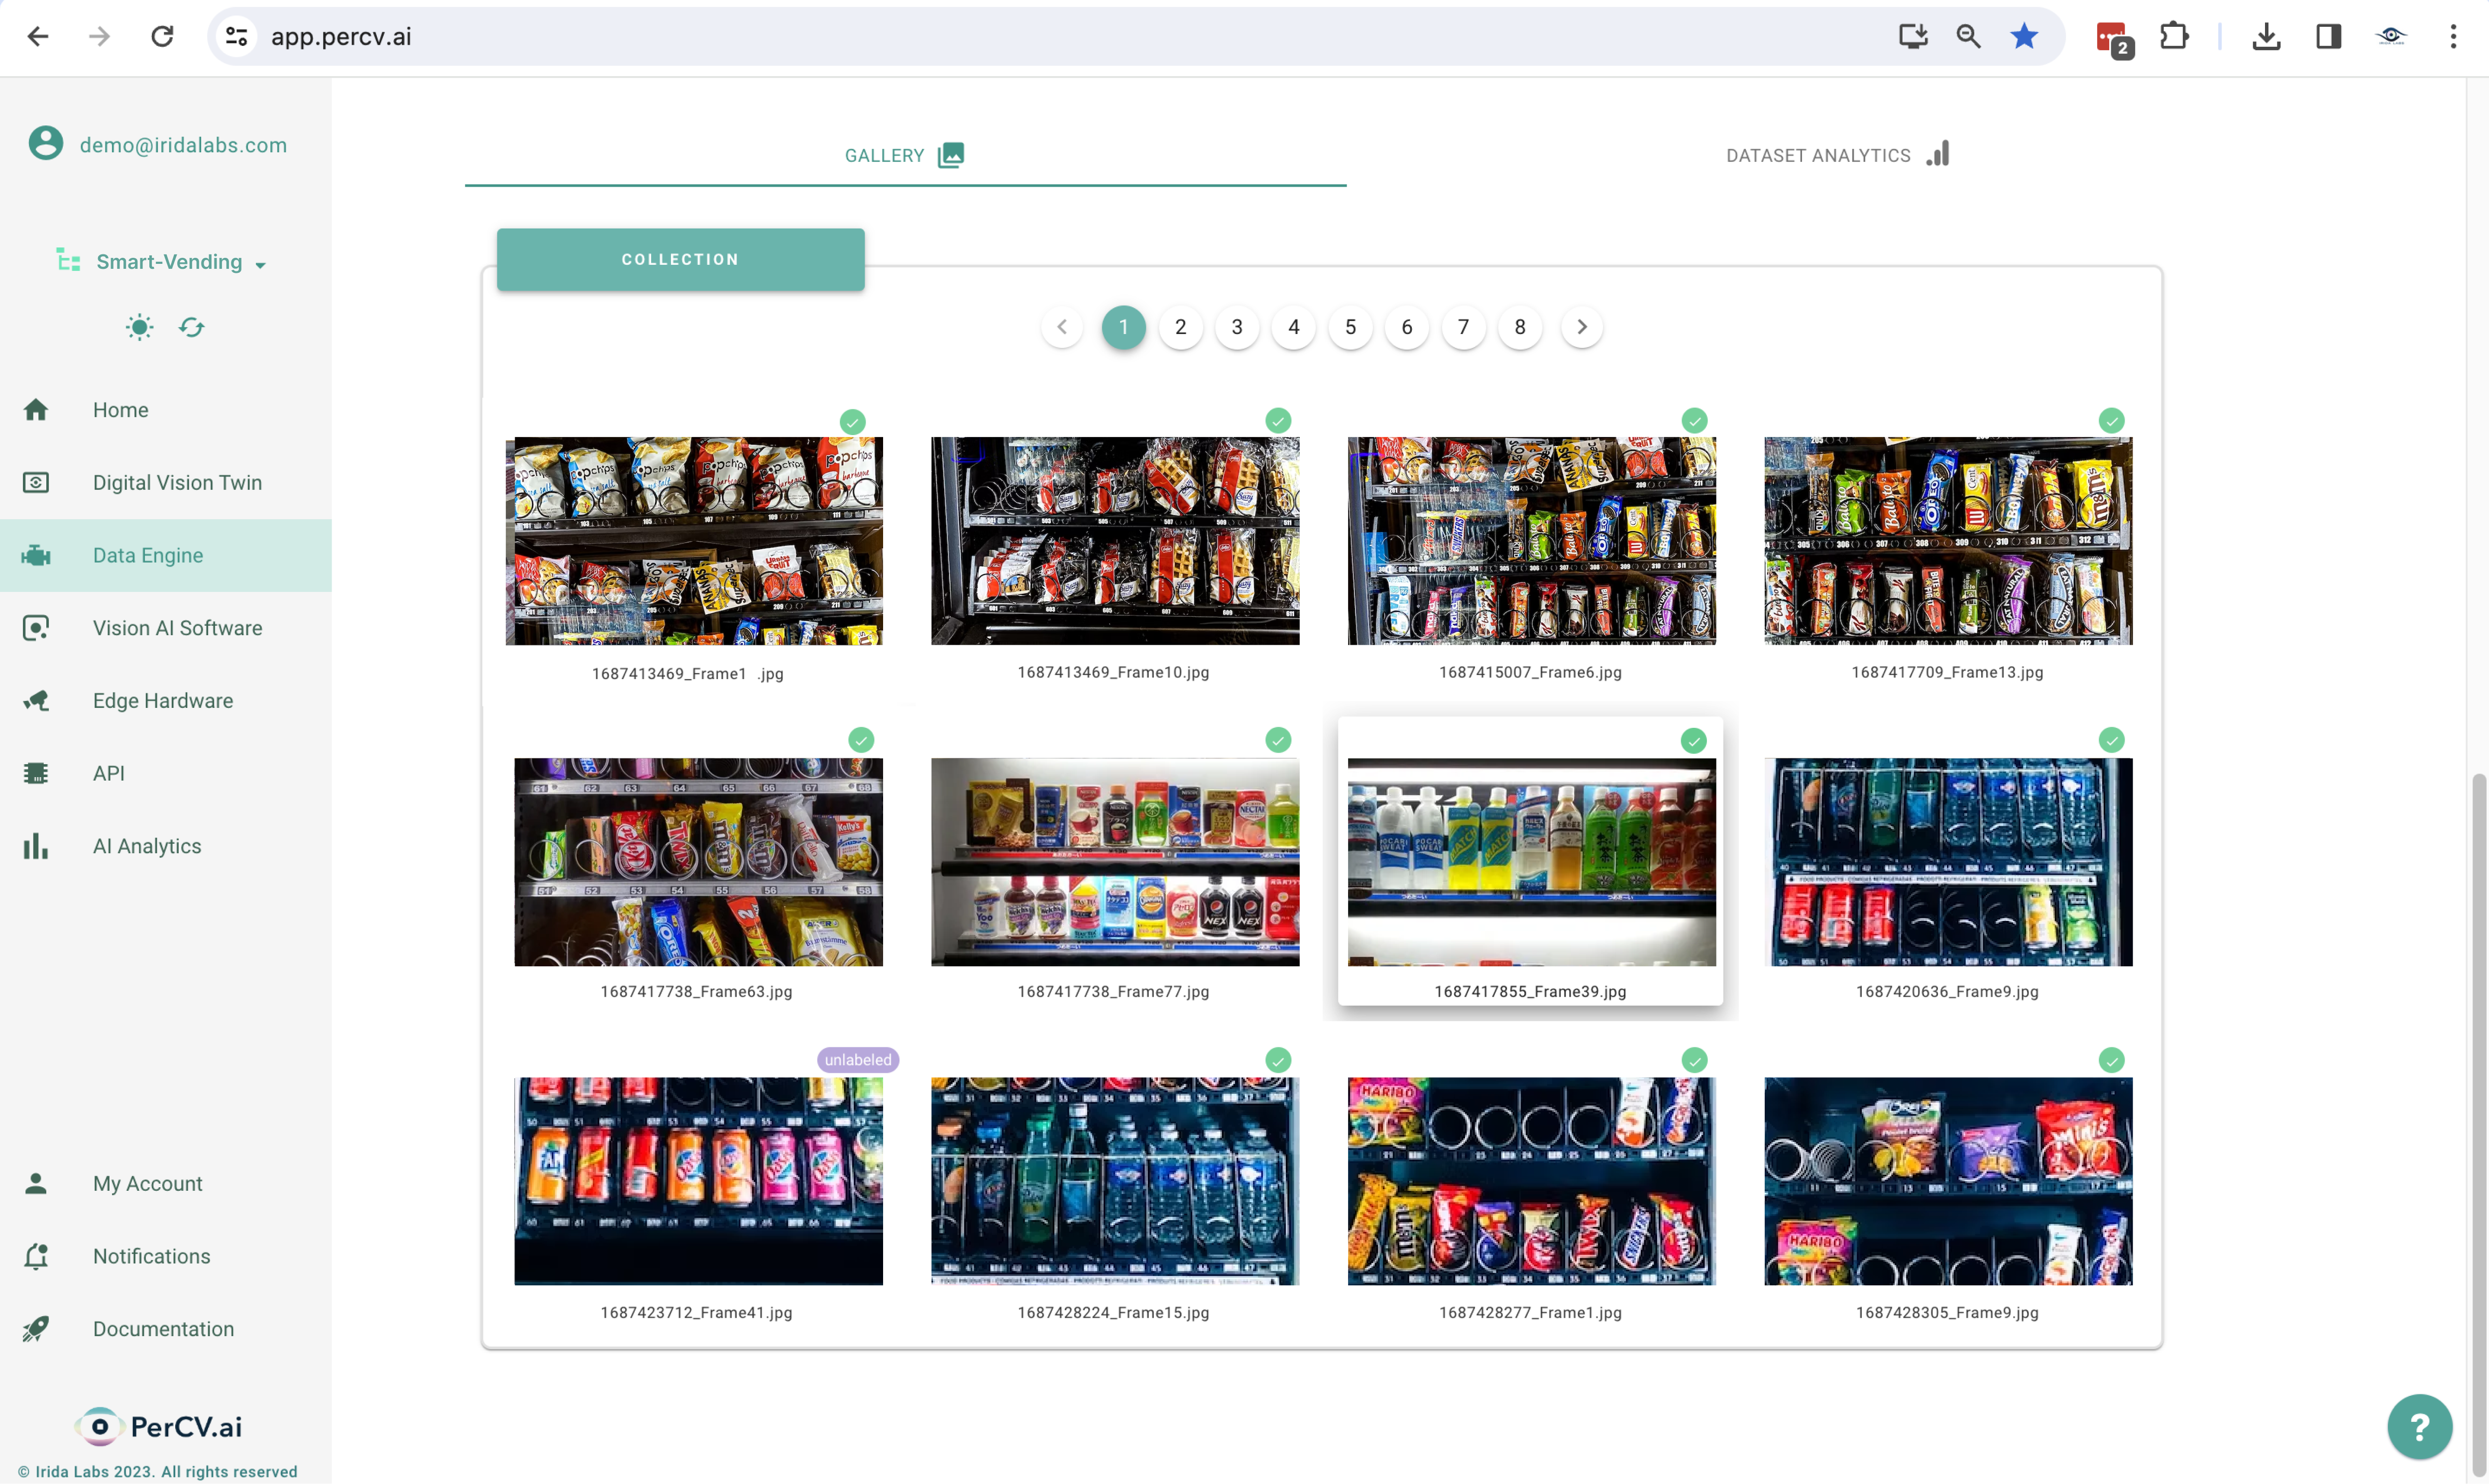 Backend system interface showing smart vending machine stocking photo